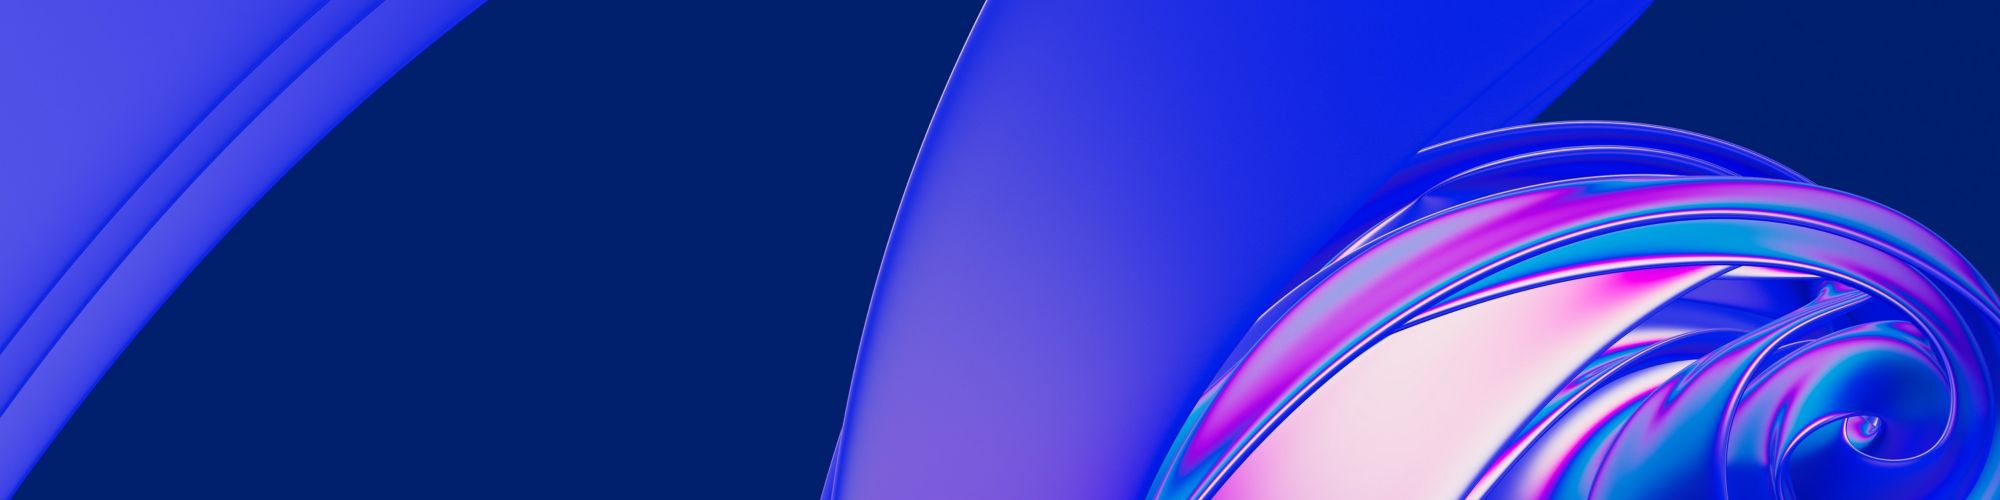 Blue and purple lines over dark blue background